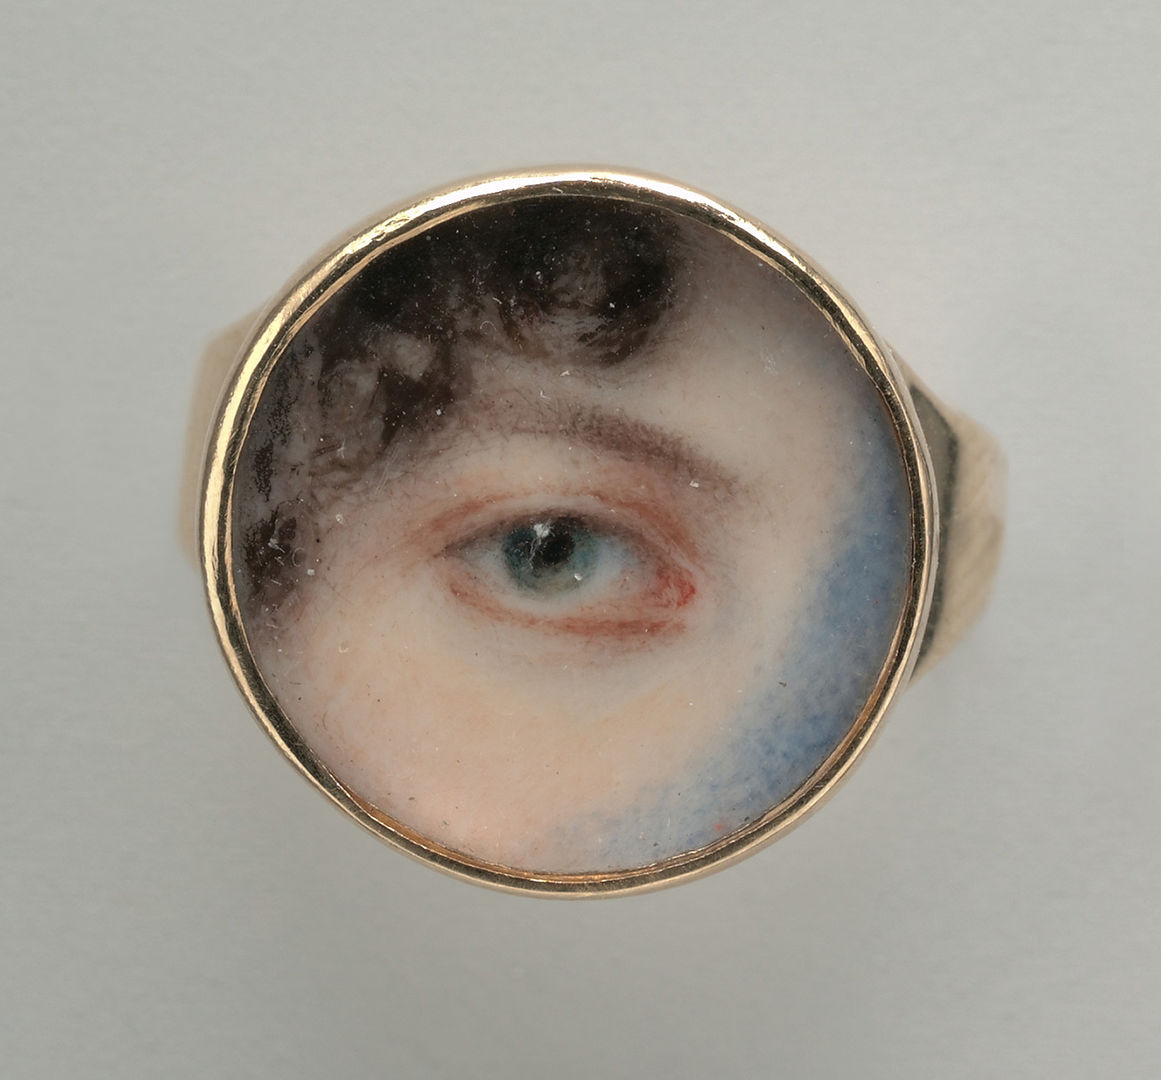 Watercolor of a 'lover's eye,' showing simply a green eye, eyebrow, and locks of brown hair around the temple in a small, circular frame.